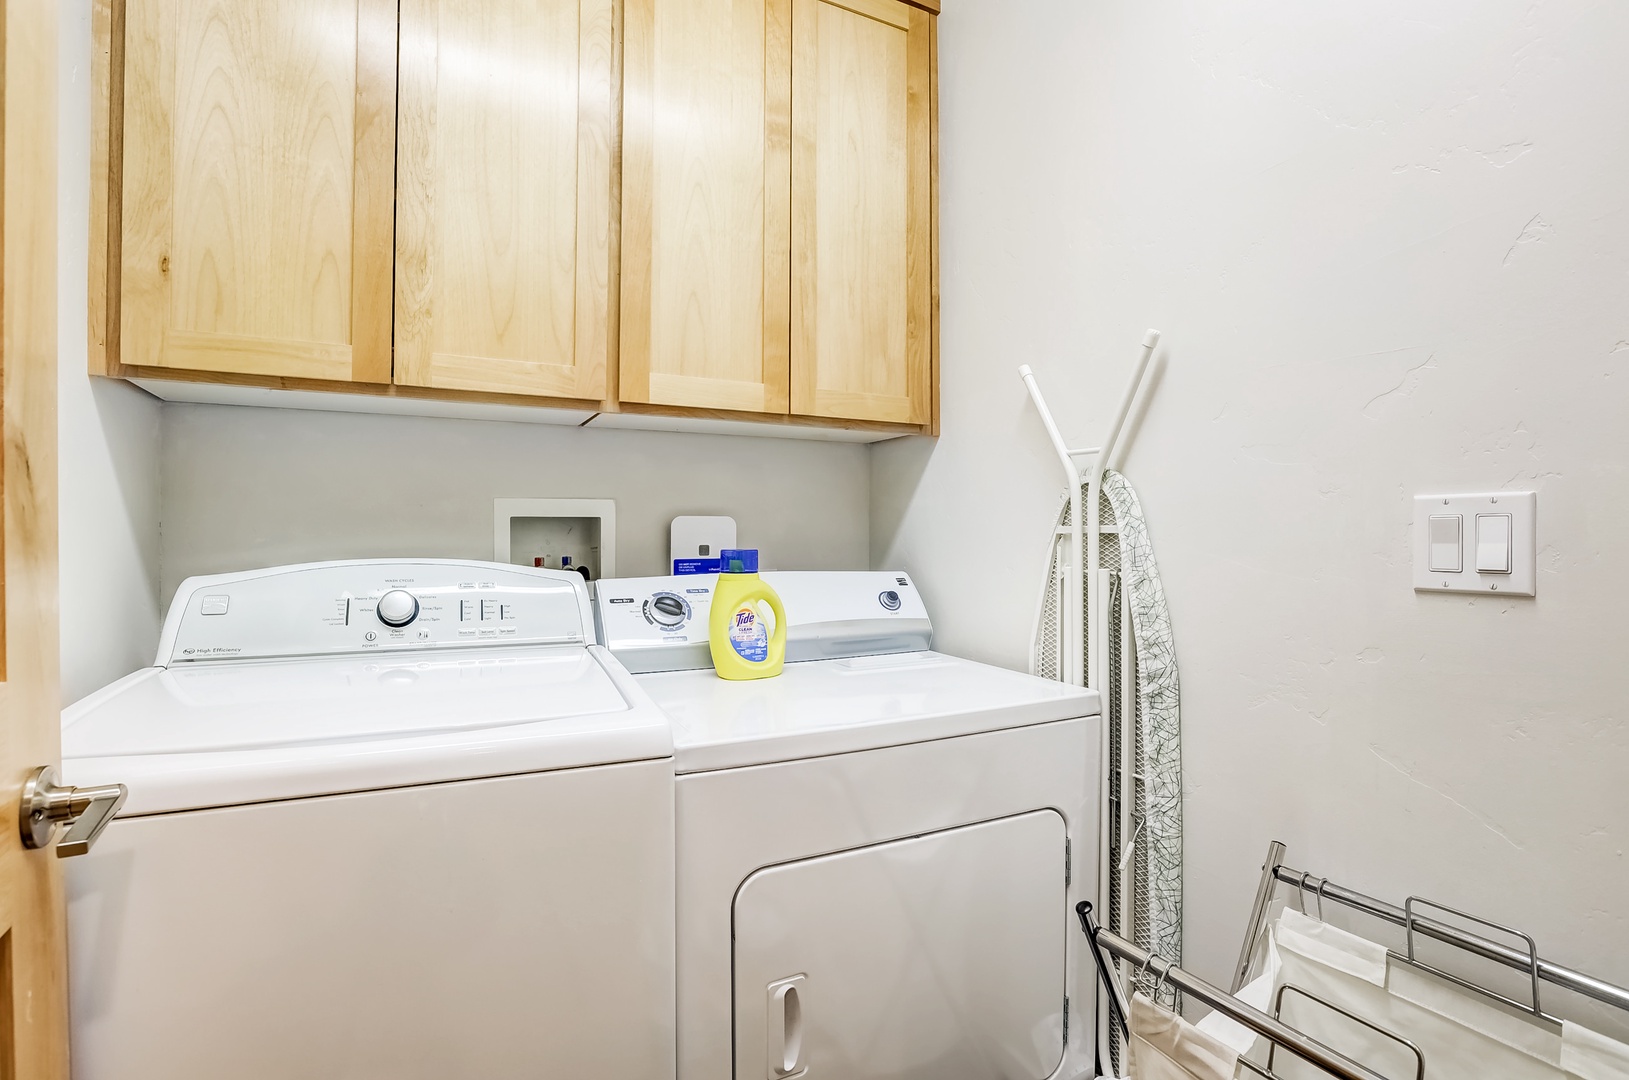 Laundry room w/ washer, dryer, iron board